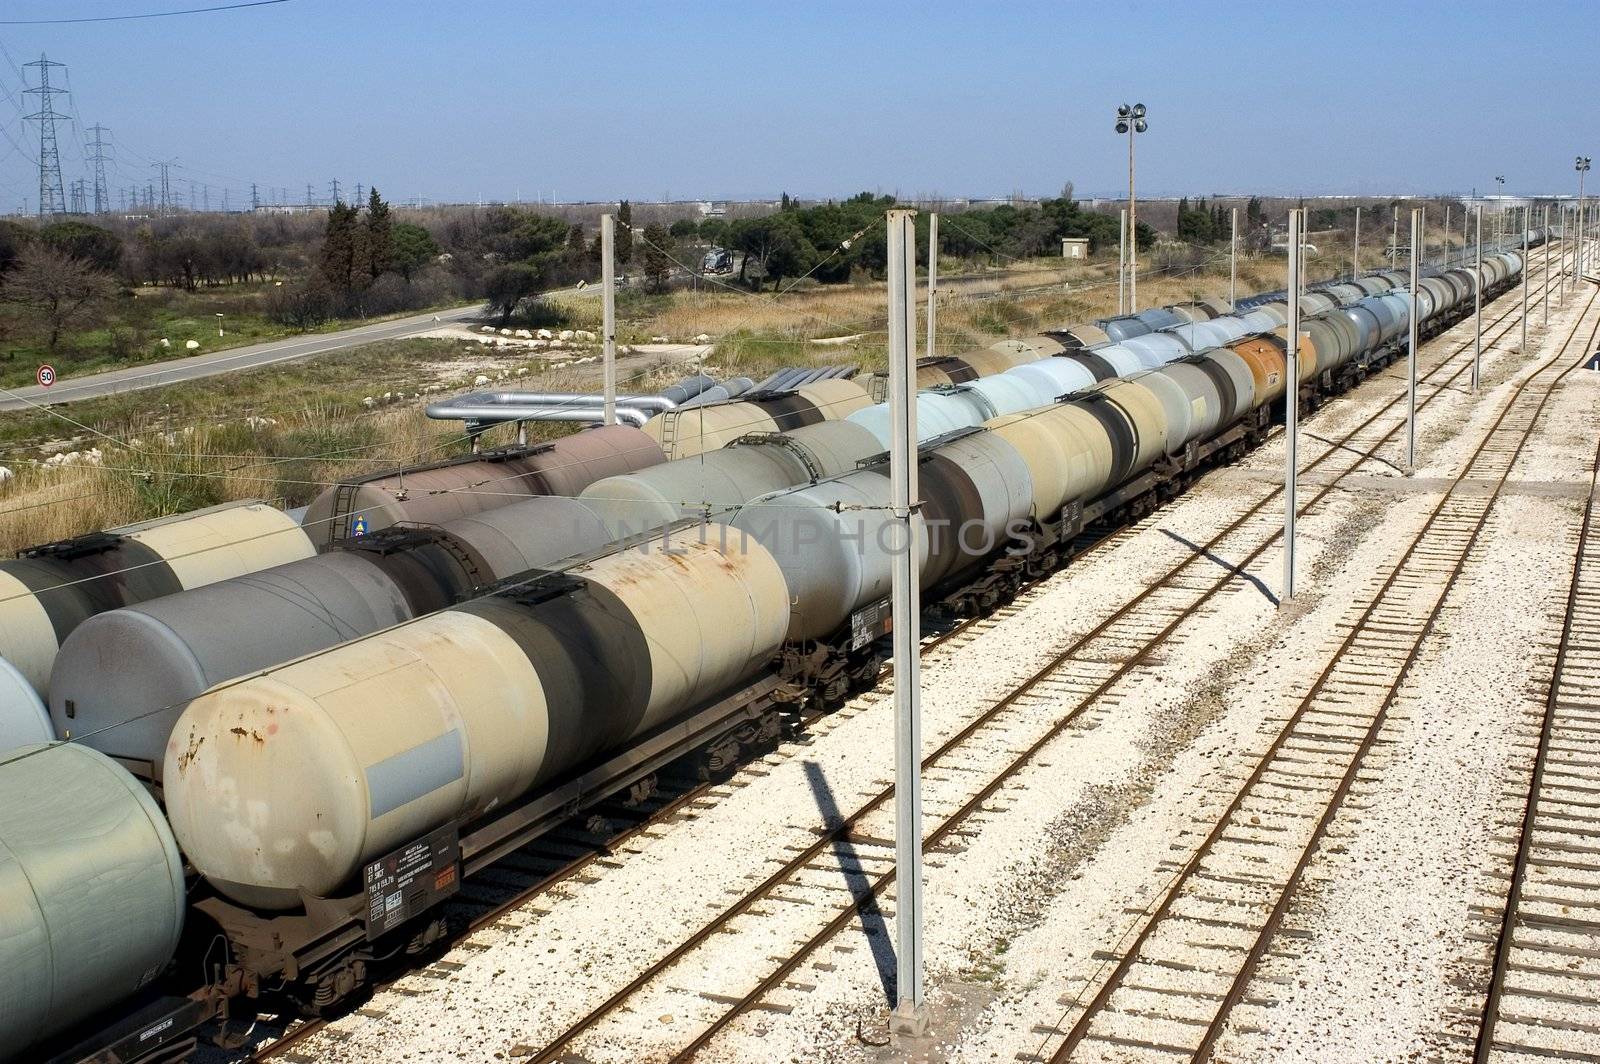 oil trains in the French industrial park of Fos on sea beside Marseille